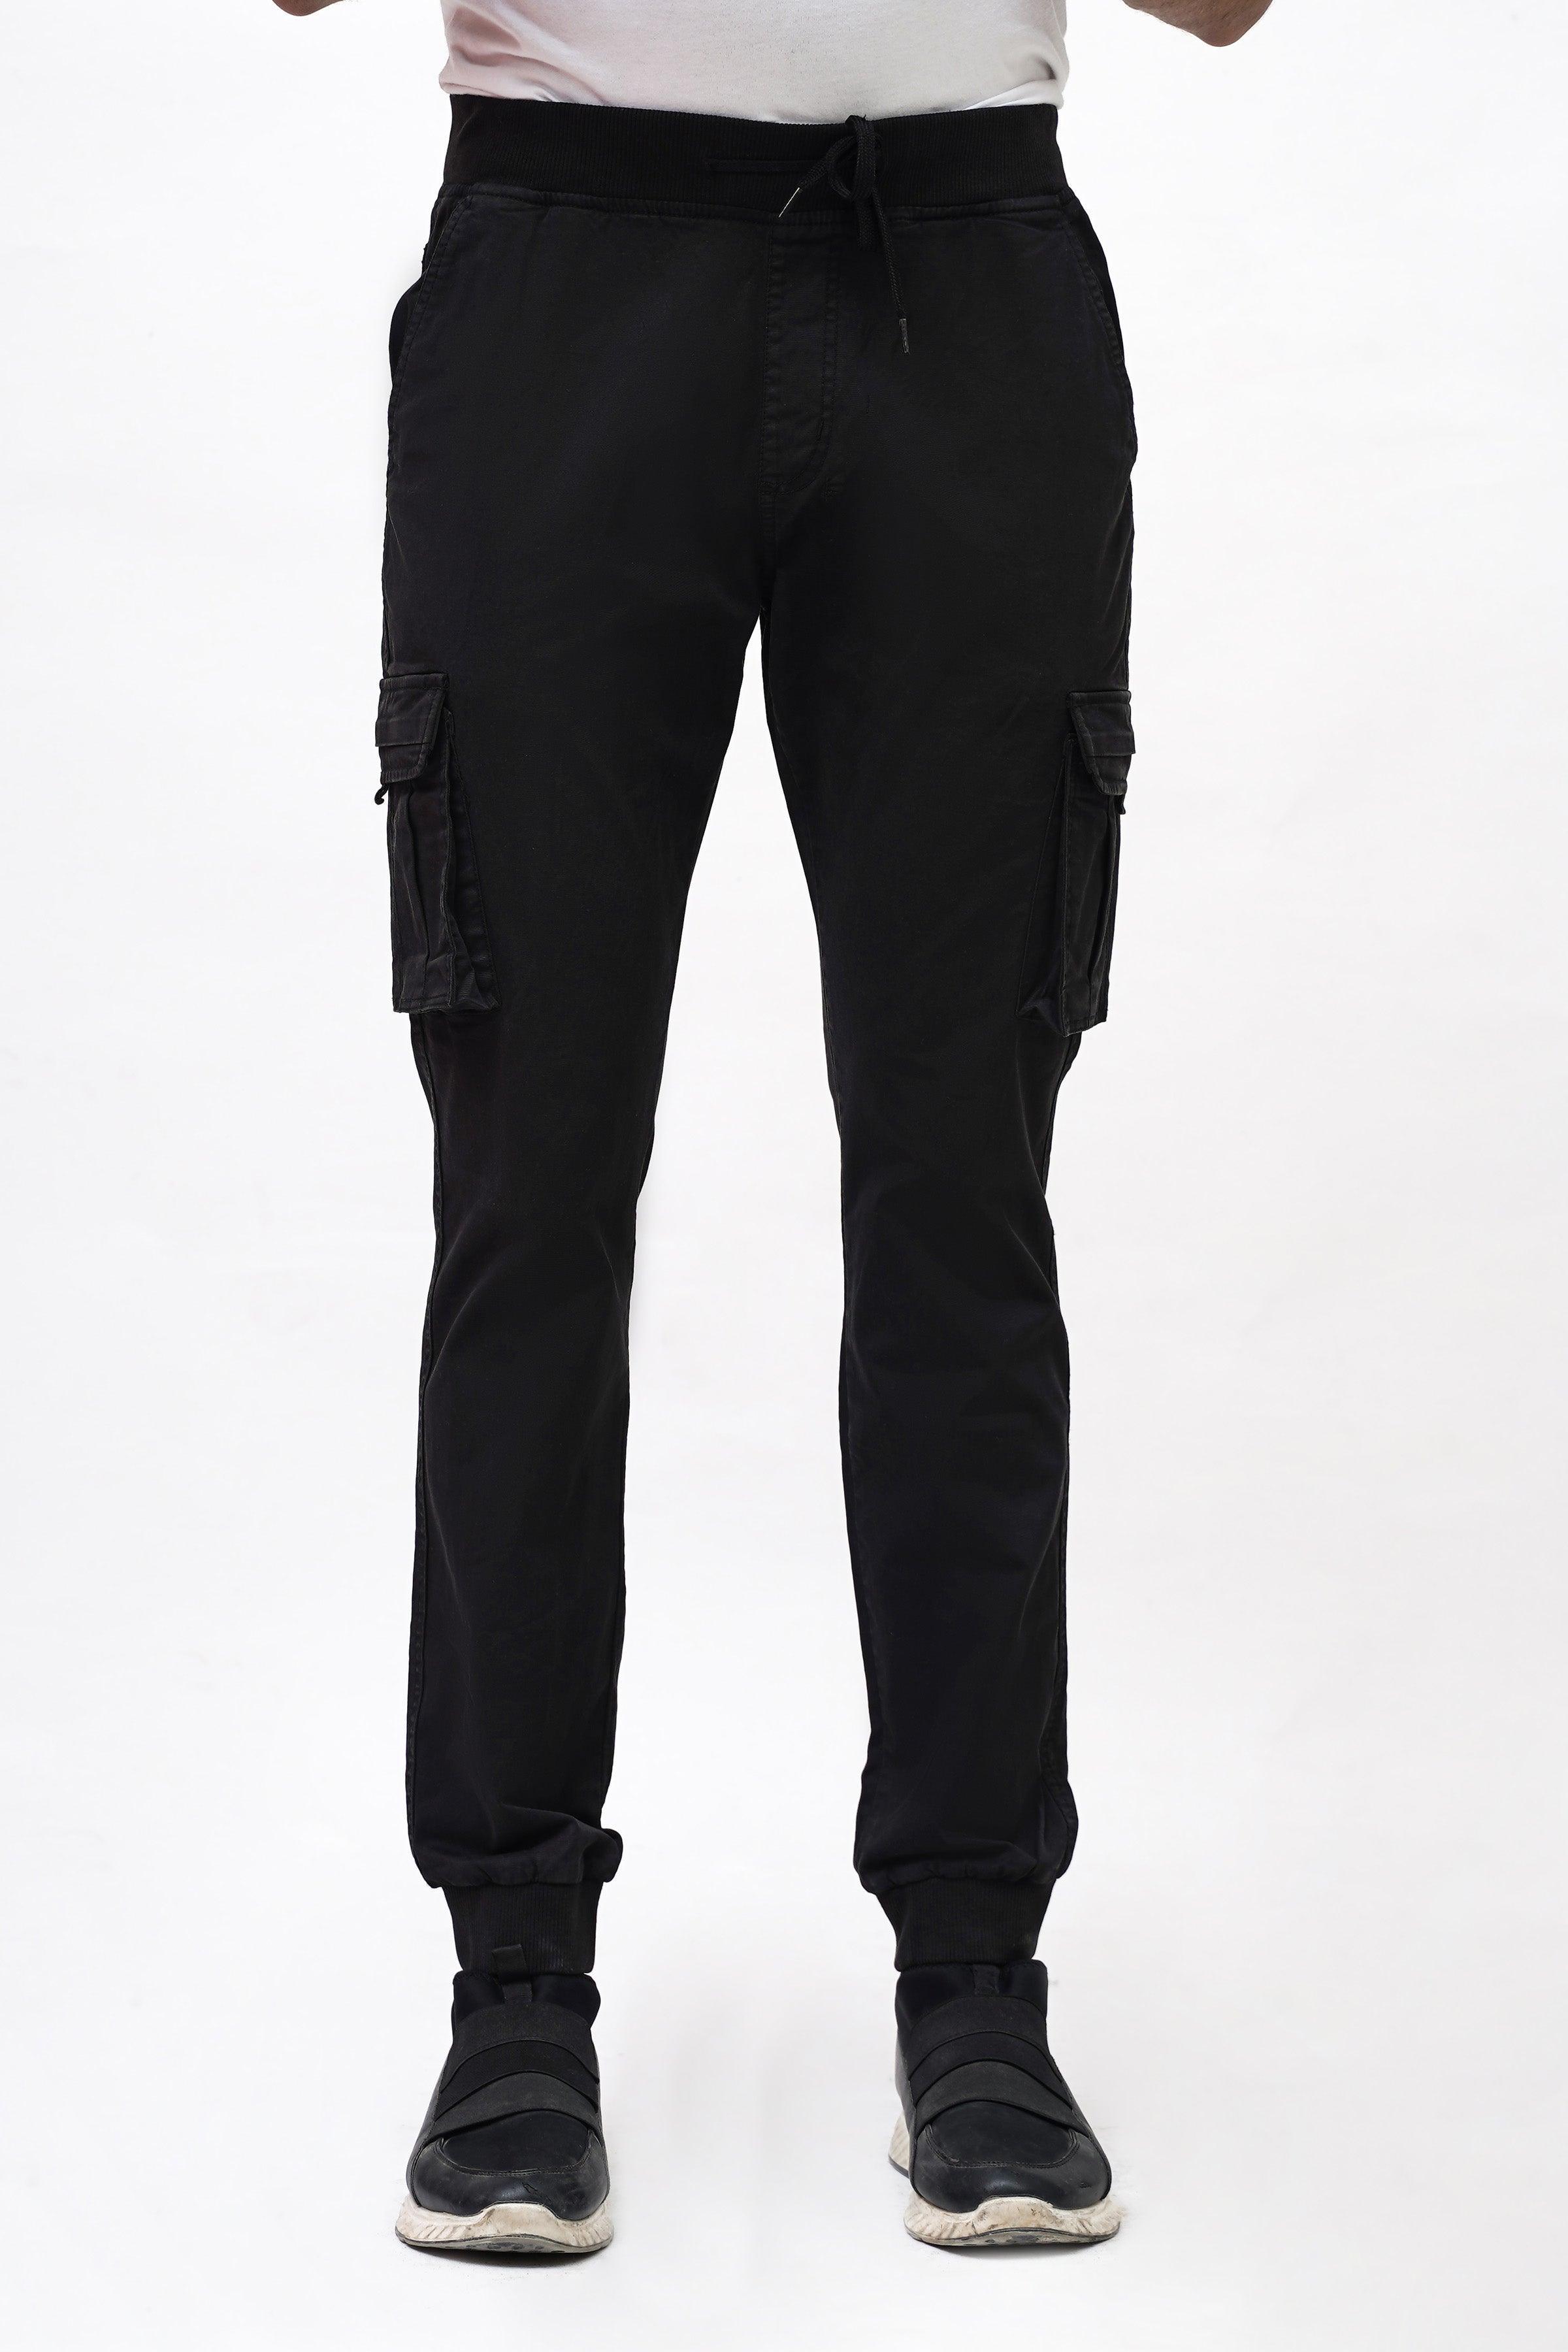 CARGO JOGGER SLIMFIT BLACK TROUSER at Charcoal Clothing